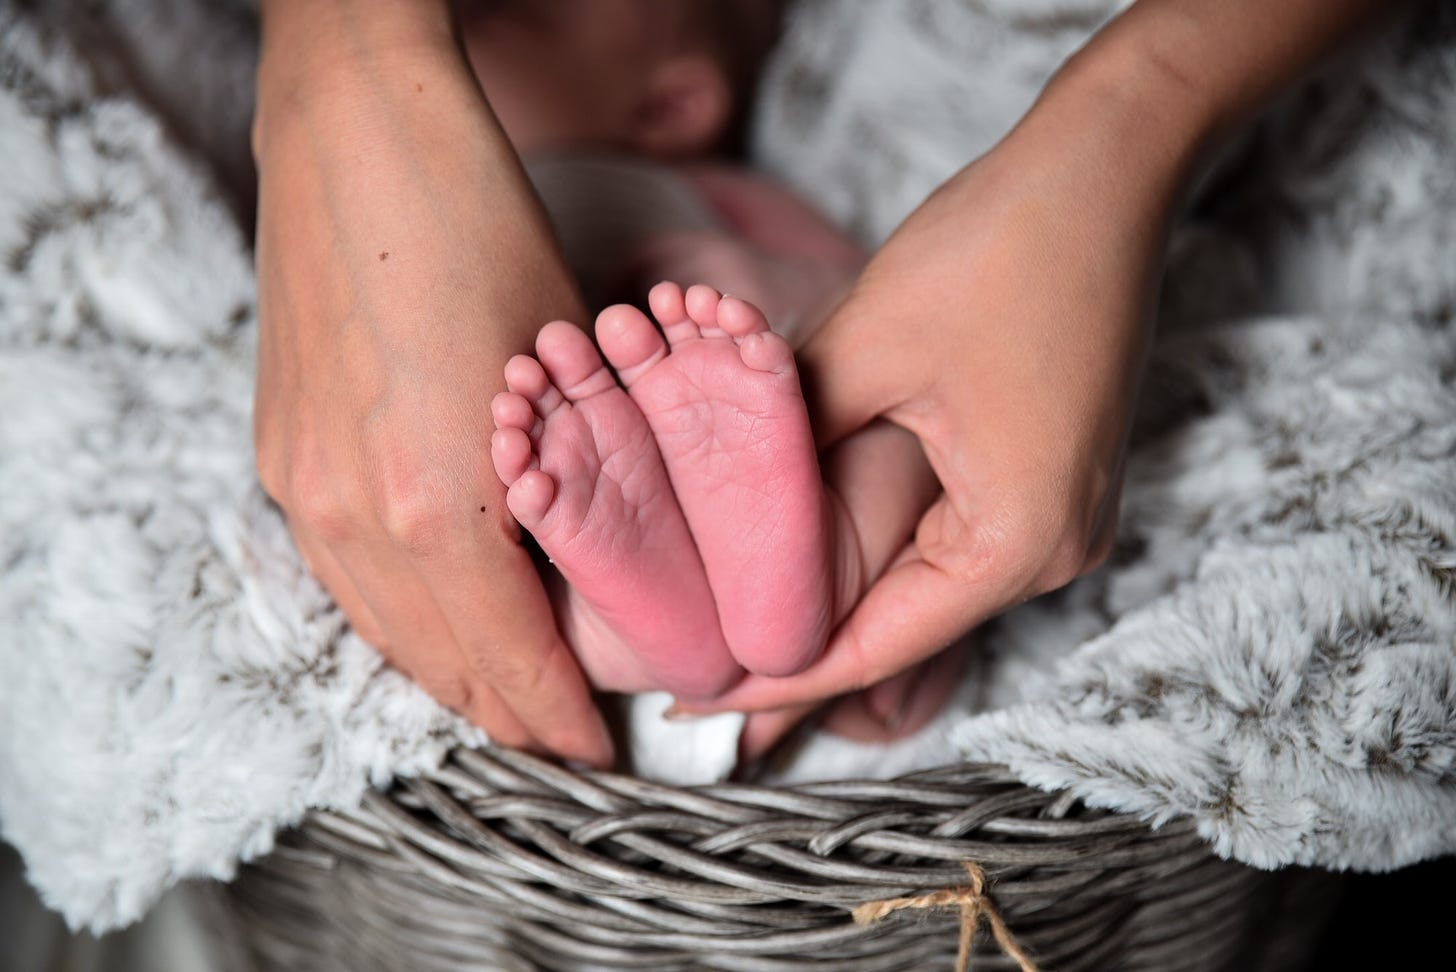 Why some pro-lifers think ‘free birth’ should be the next policy goal